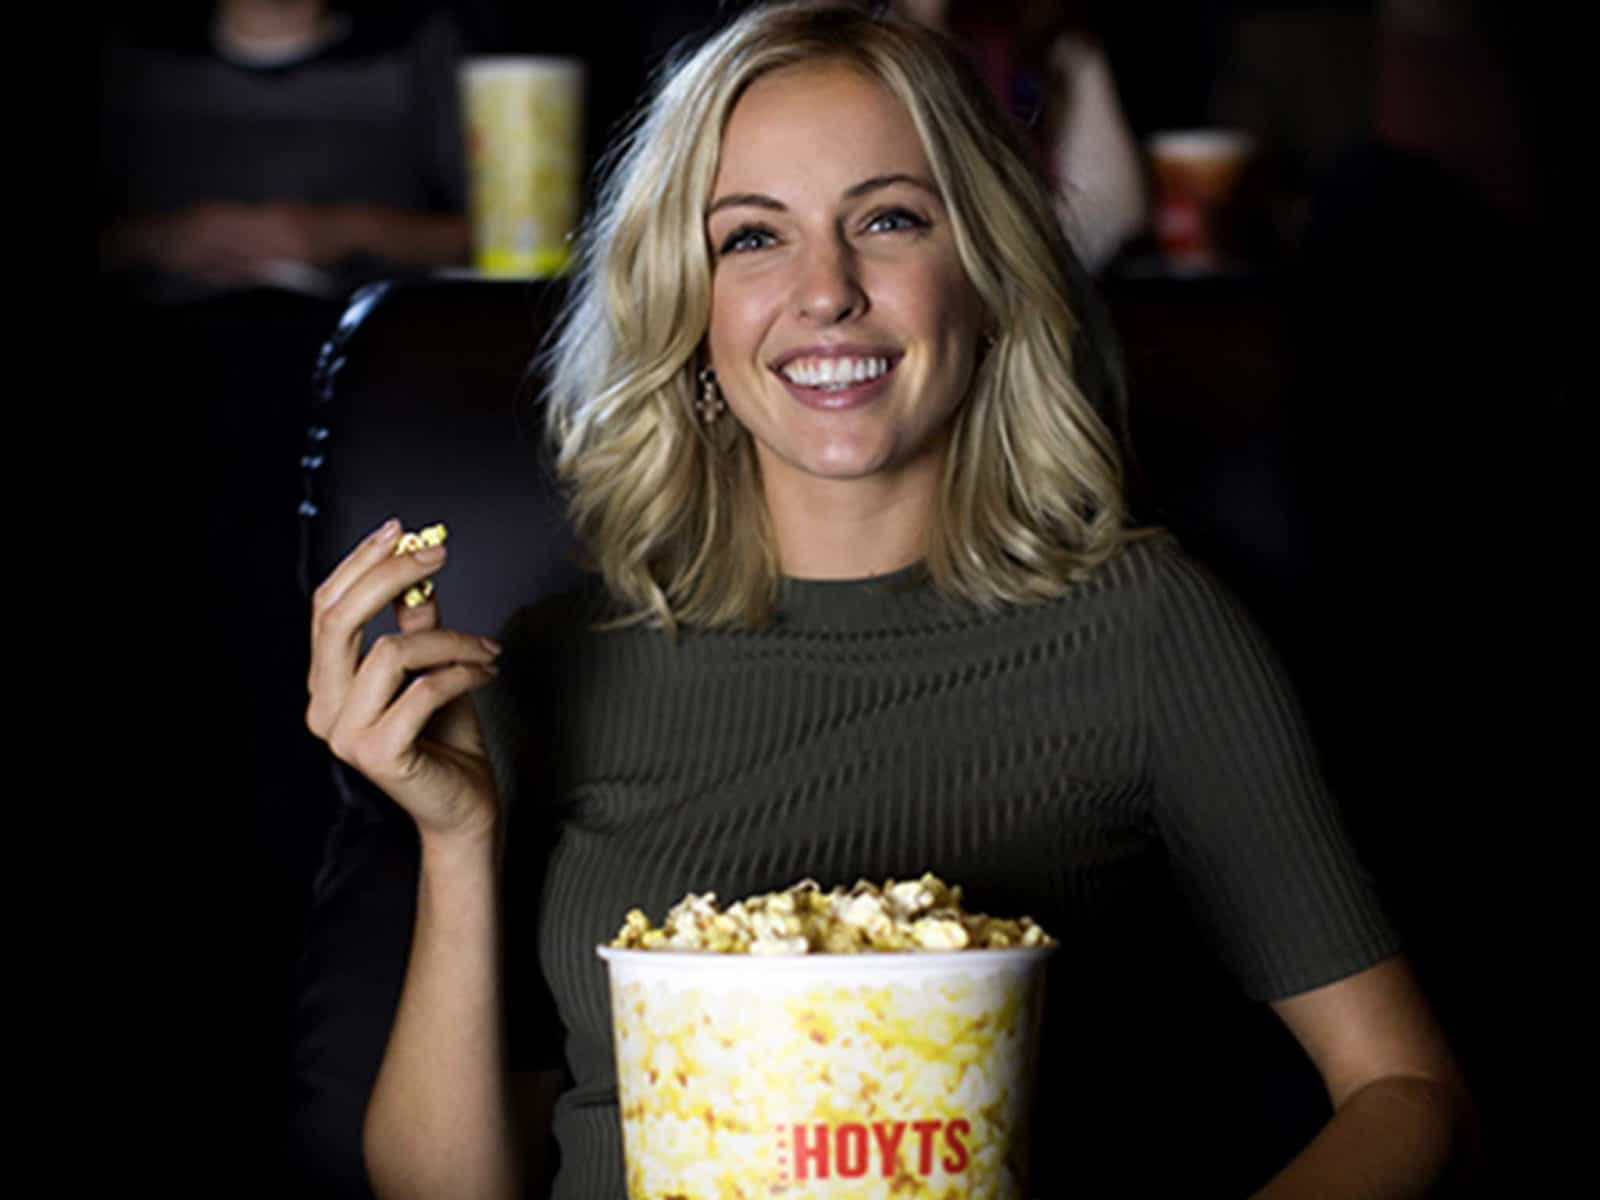 Woman eating popcorn in move theatre